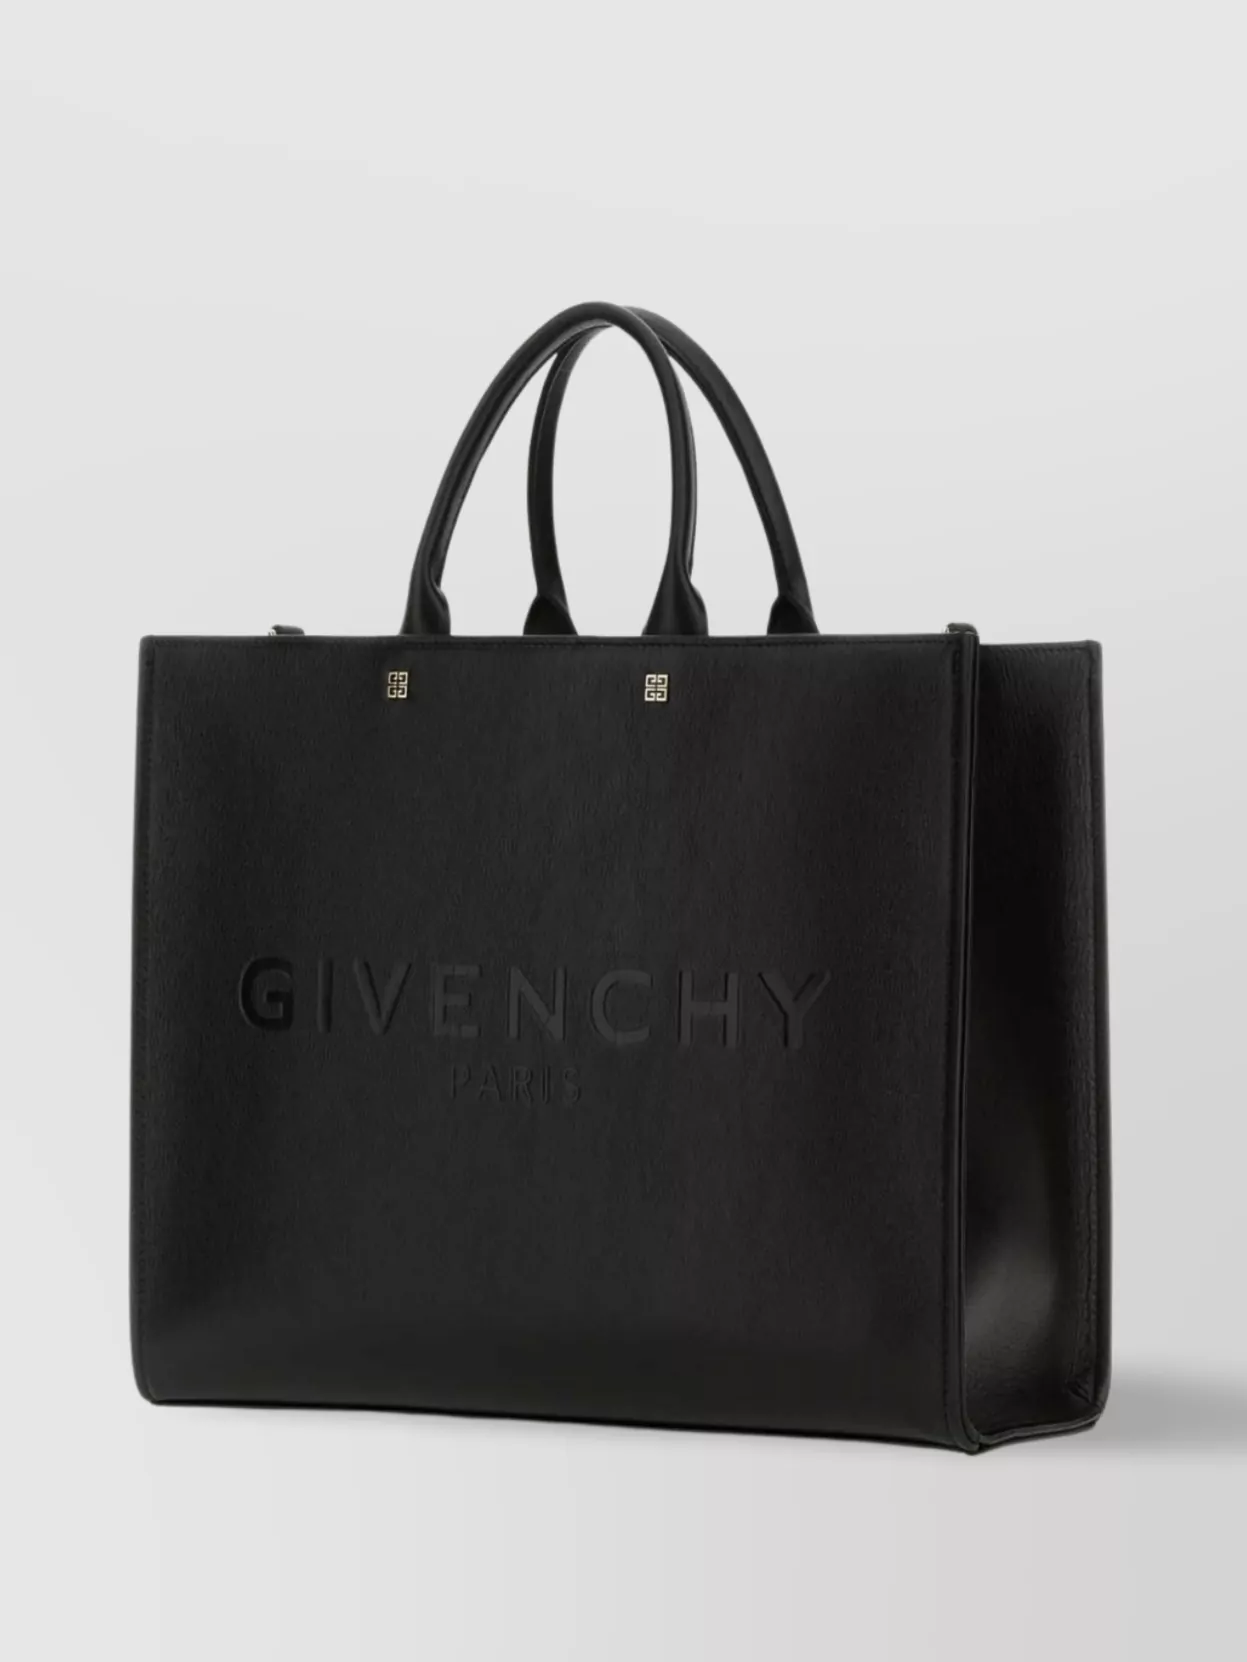 Shop Givenchy Tote Bag With Rectangular Shape And Top Handle